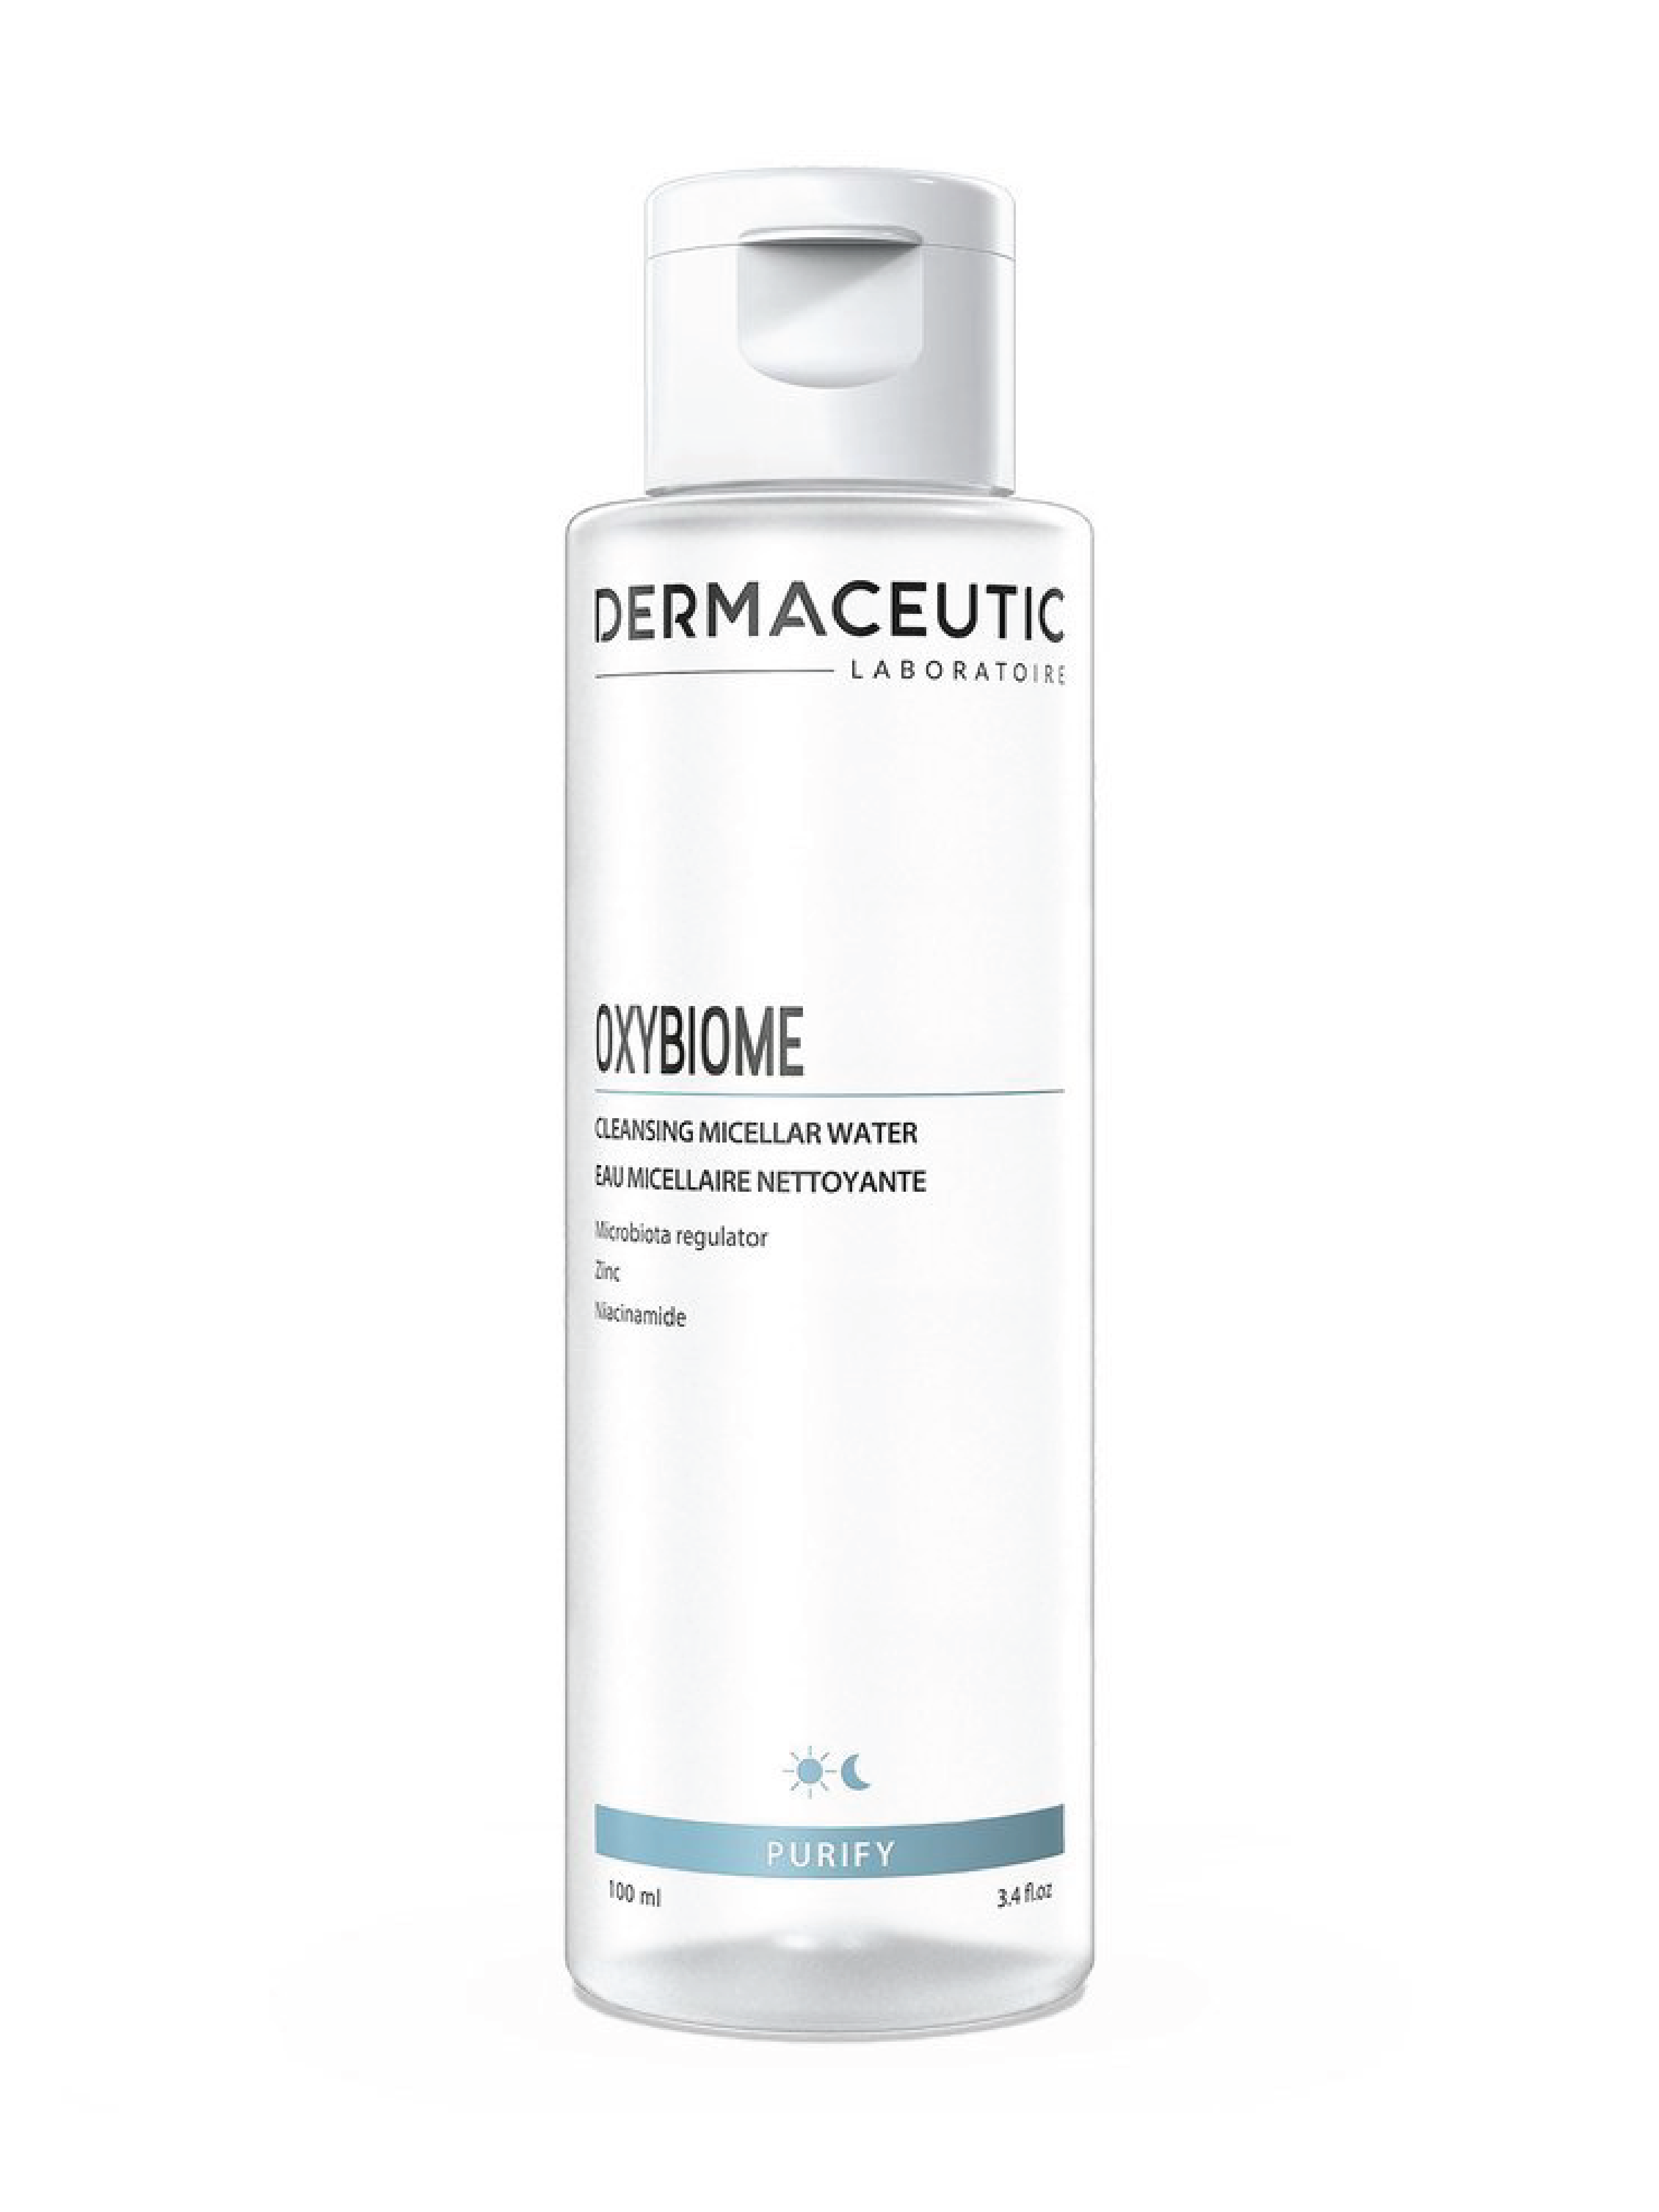 Dermaceutic Oxybiome Micellar Water, 100 ml